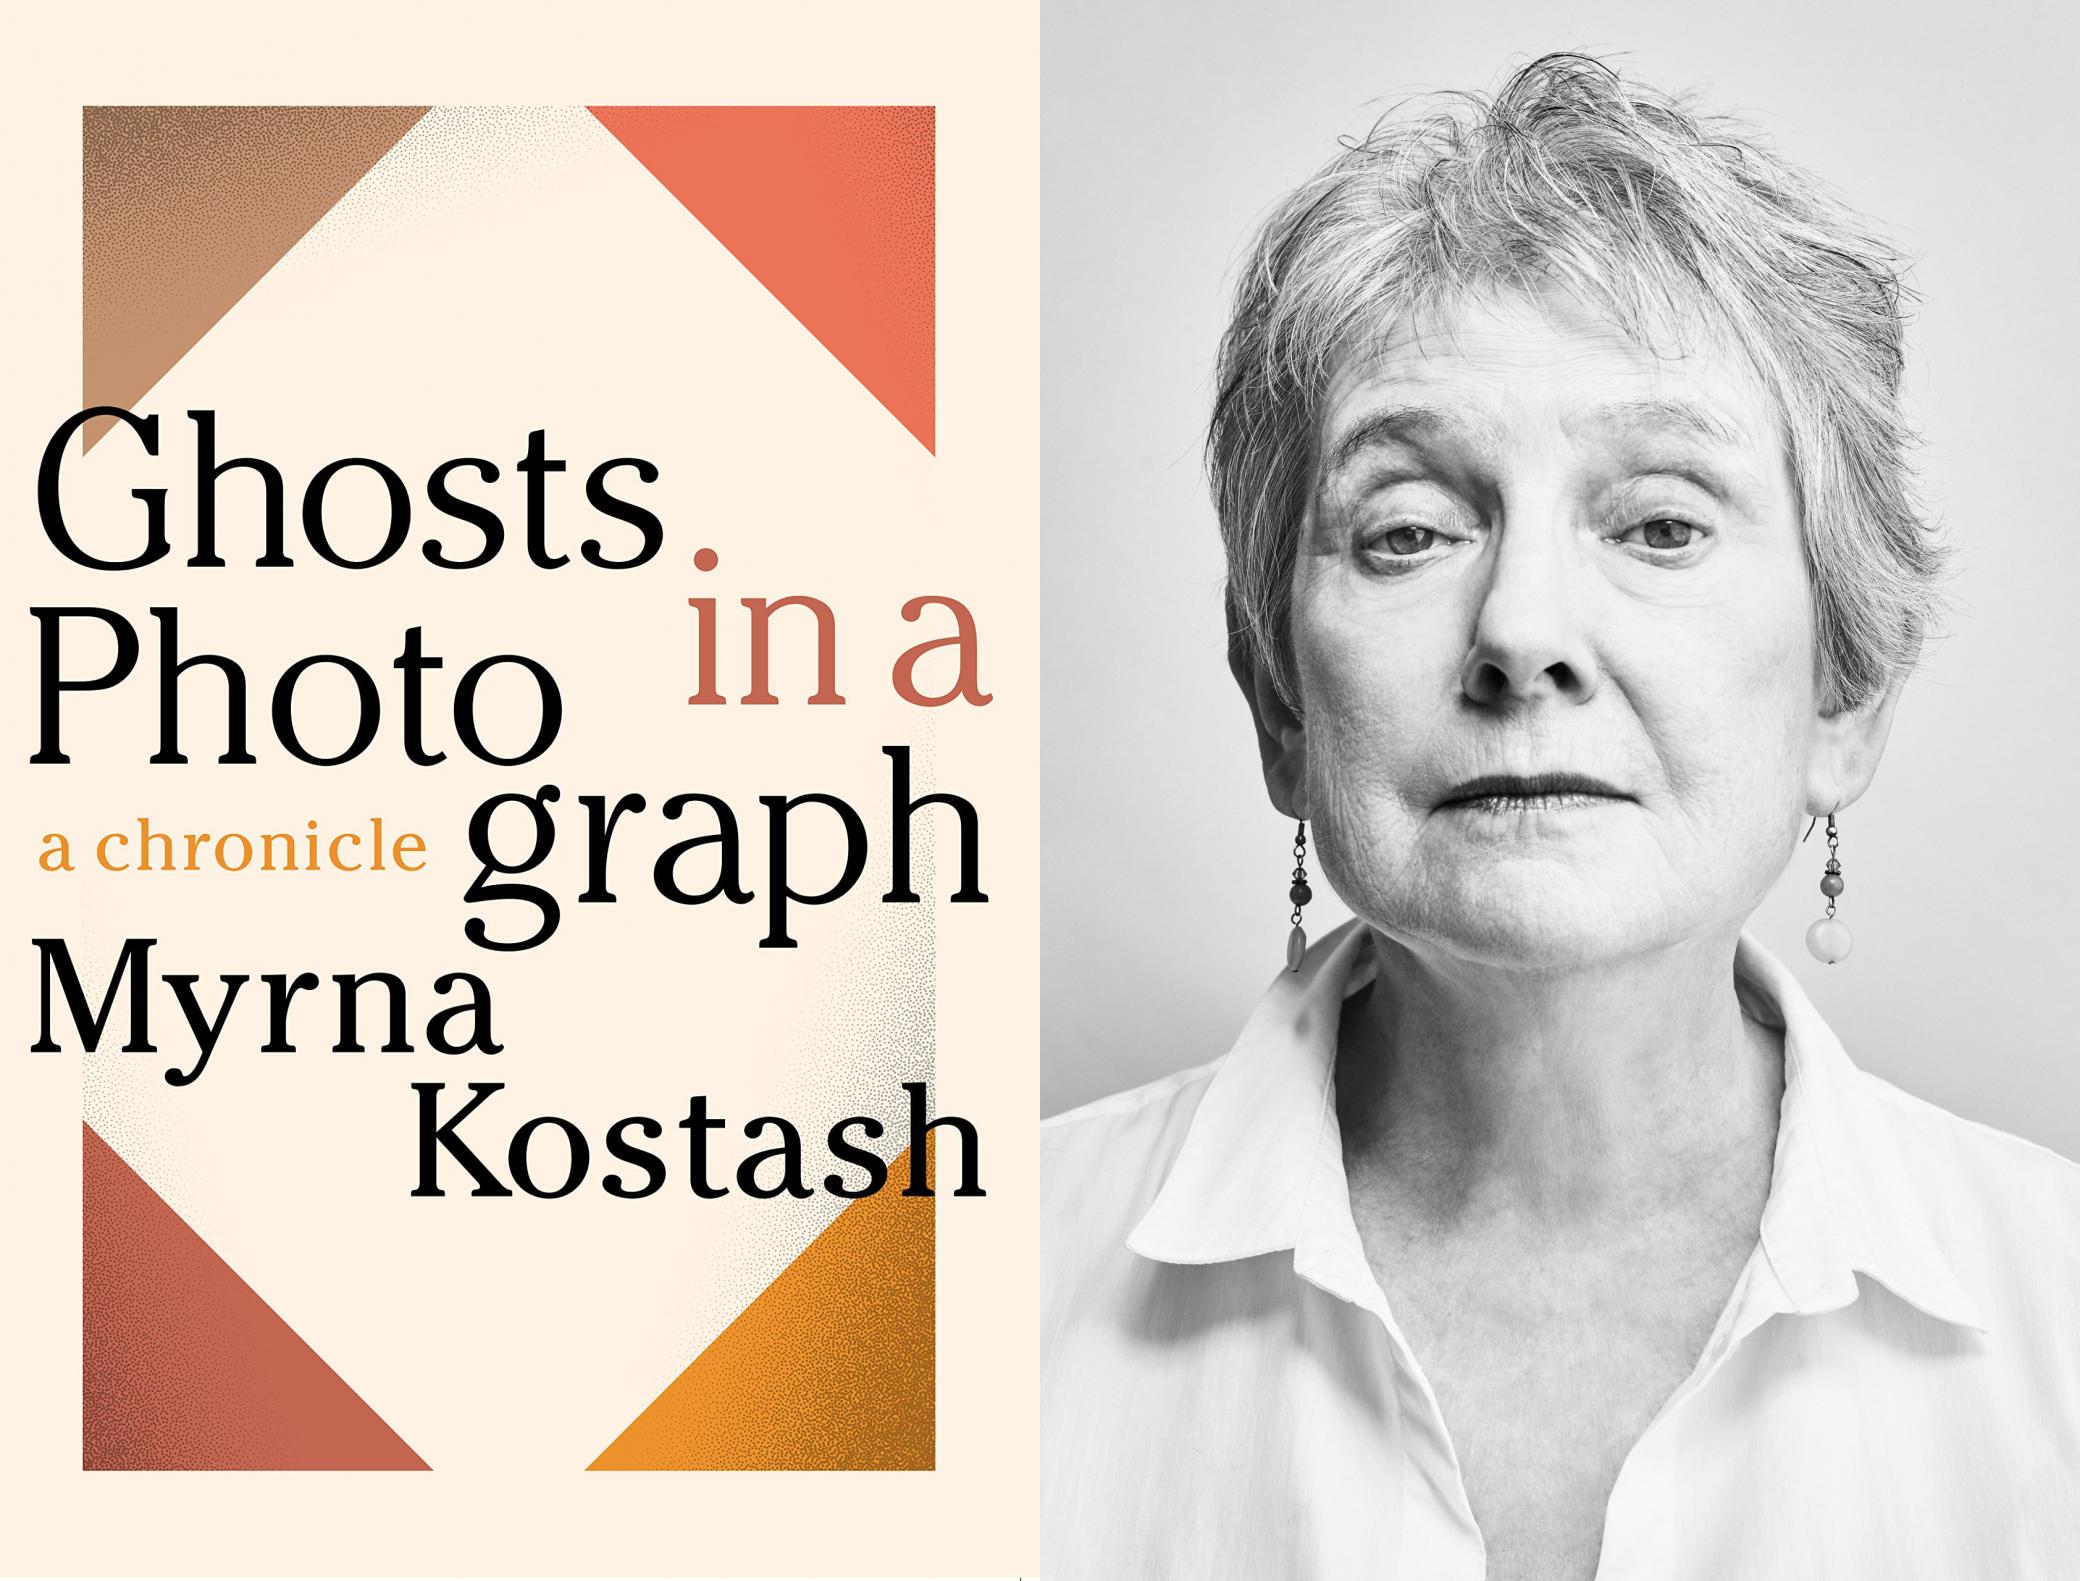 On the left, a book cover for Ghosts in a Photograph features text of the title and the author, Myrna Kostash. On the right, a woman with short hair and a white blouse poses for a black and white portrait.